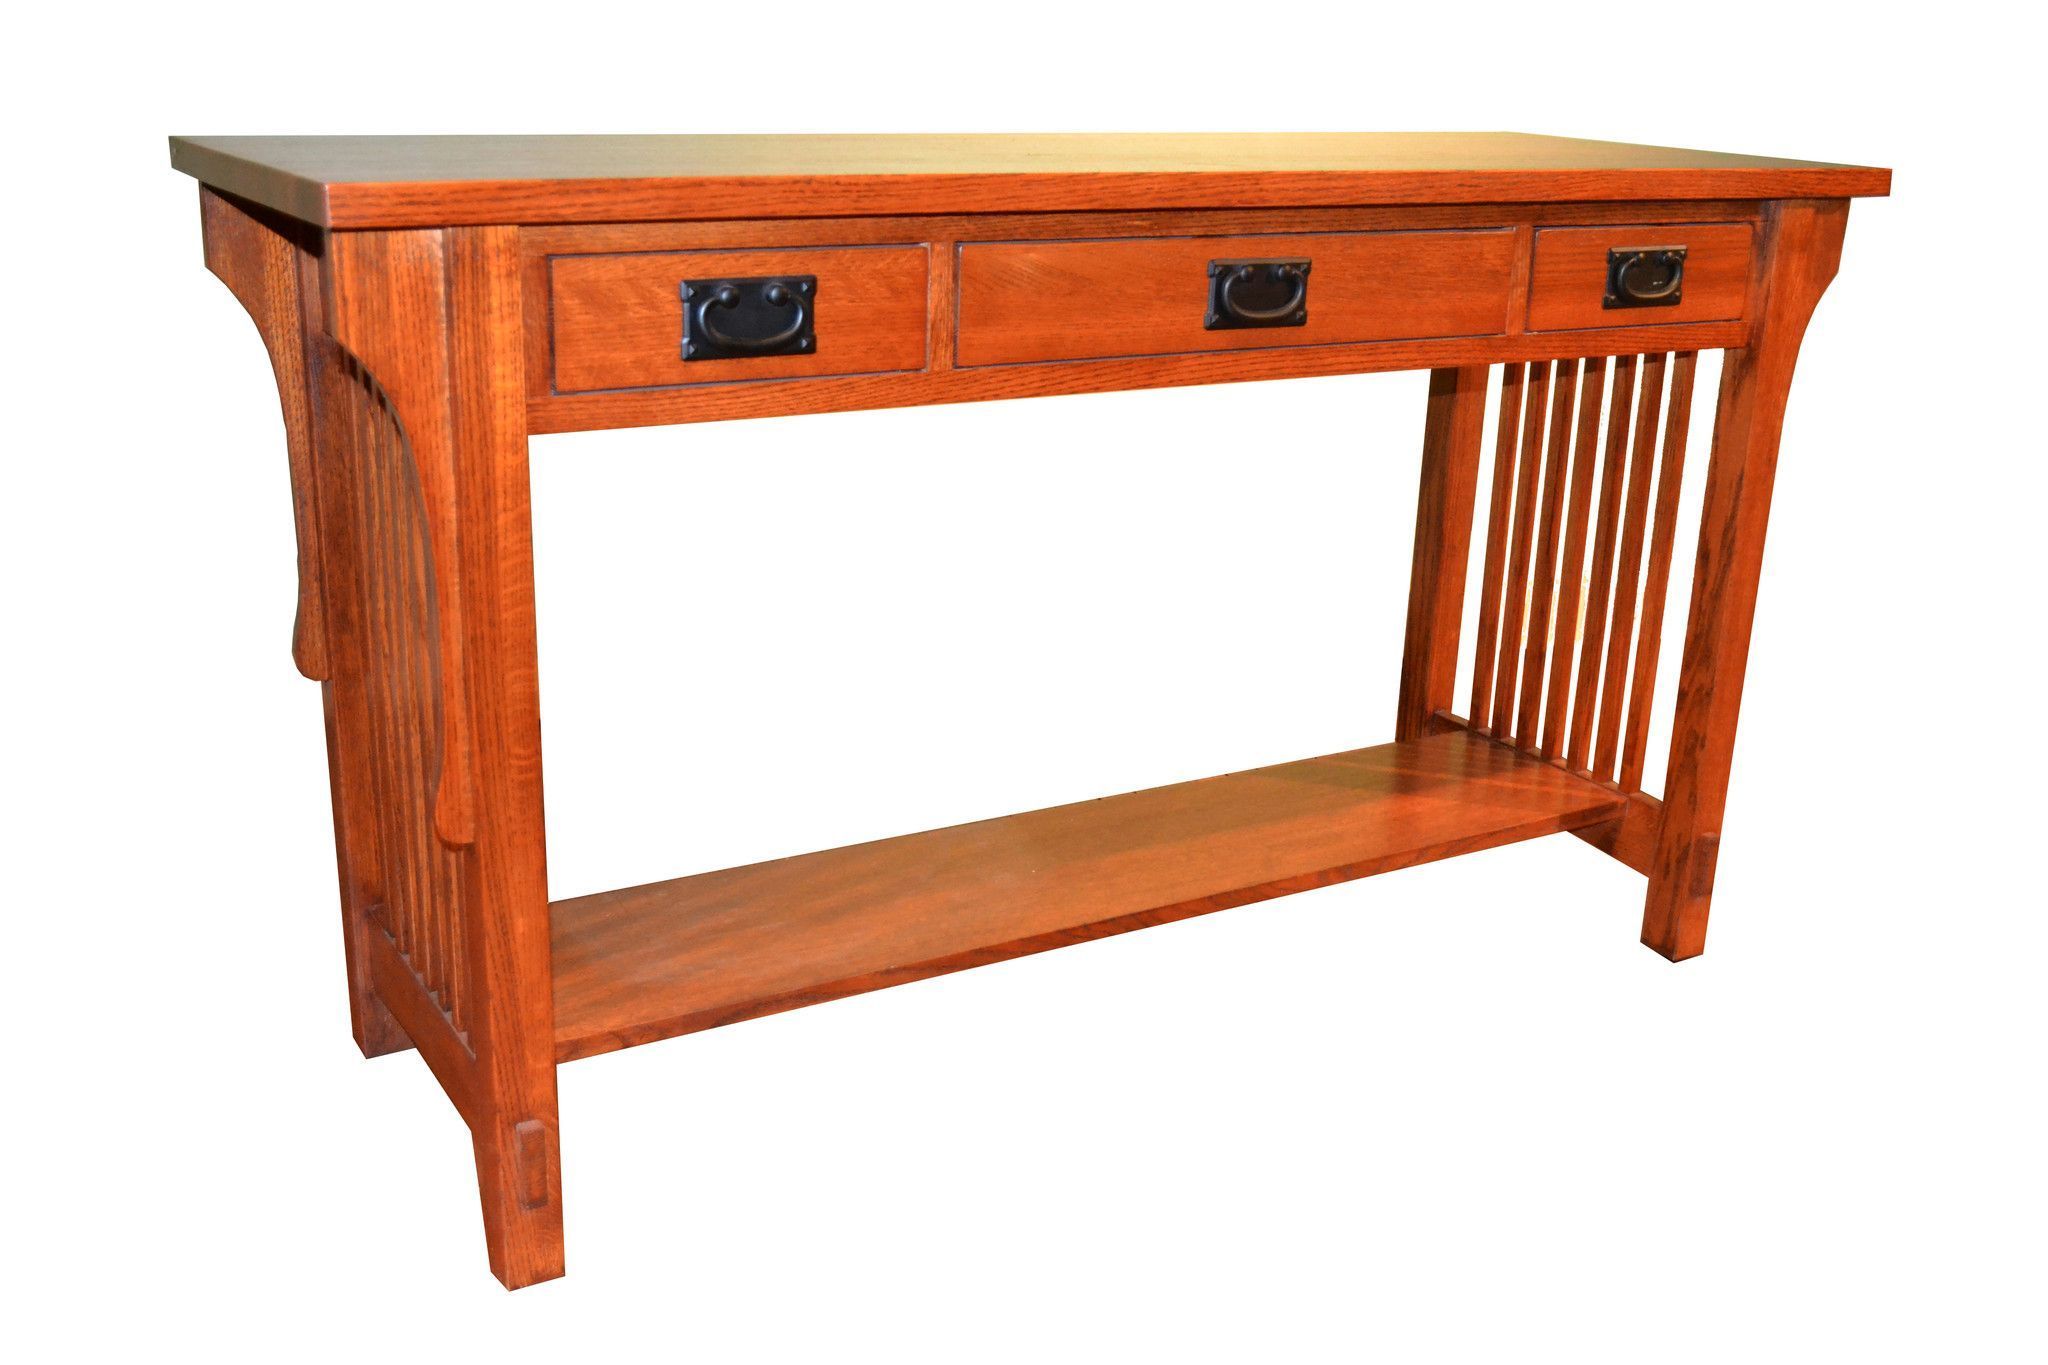 Beautifully Made Solid Oak Mission / Arts And Crafts Crofter Style Intended For Metal And Oak Console Tables (View 11 of 20)